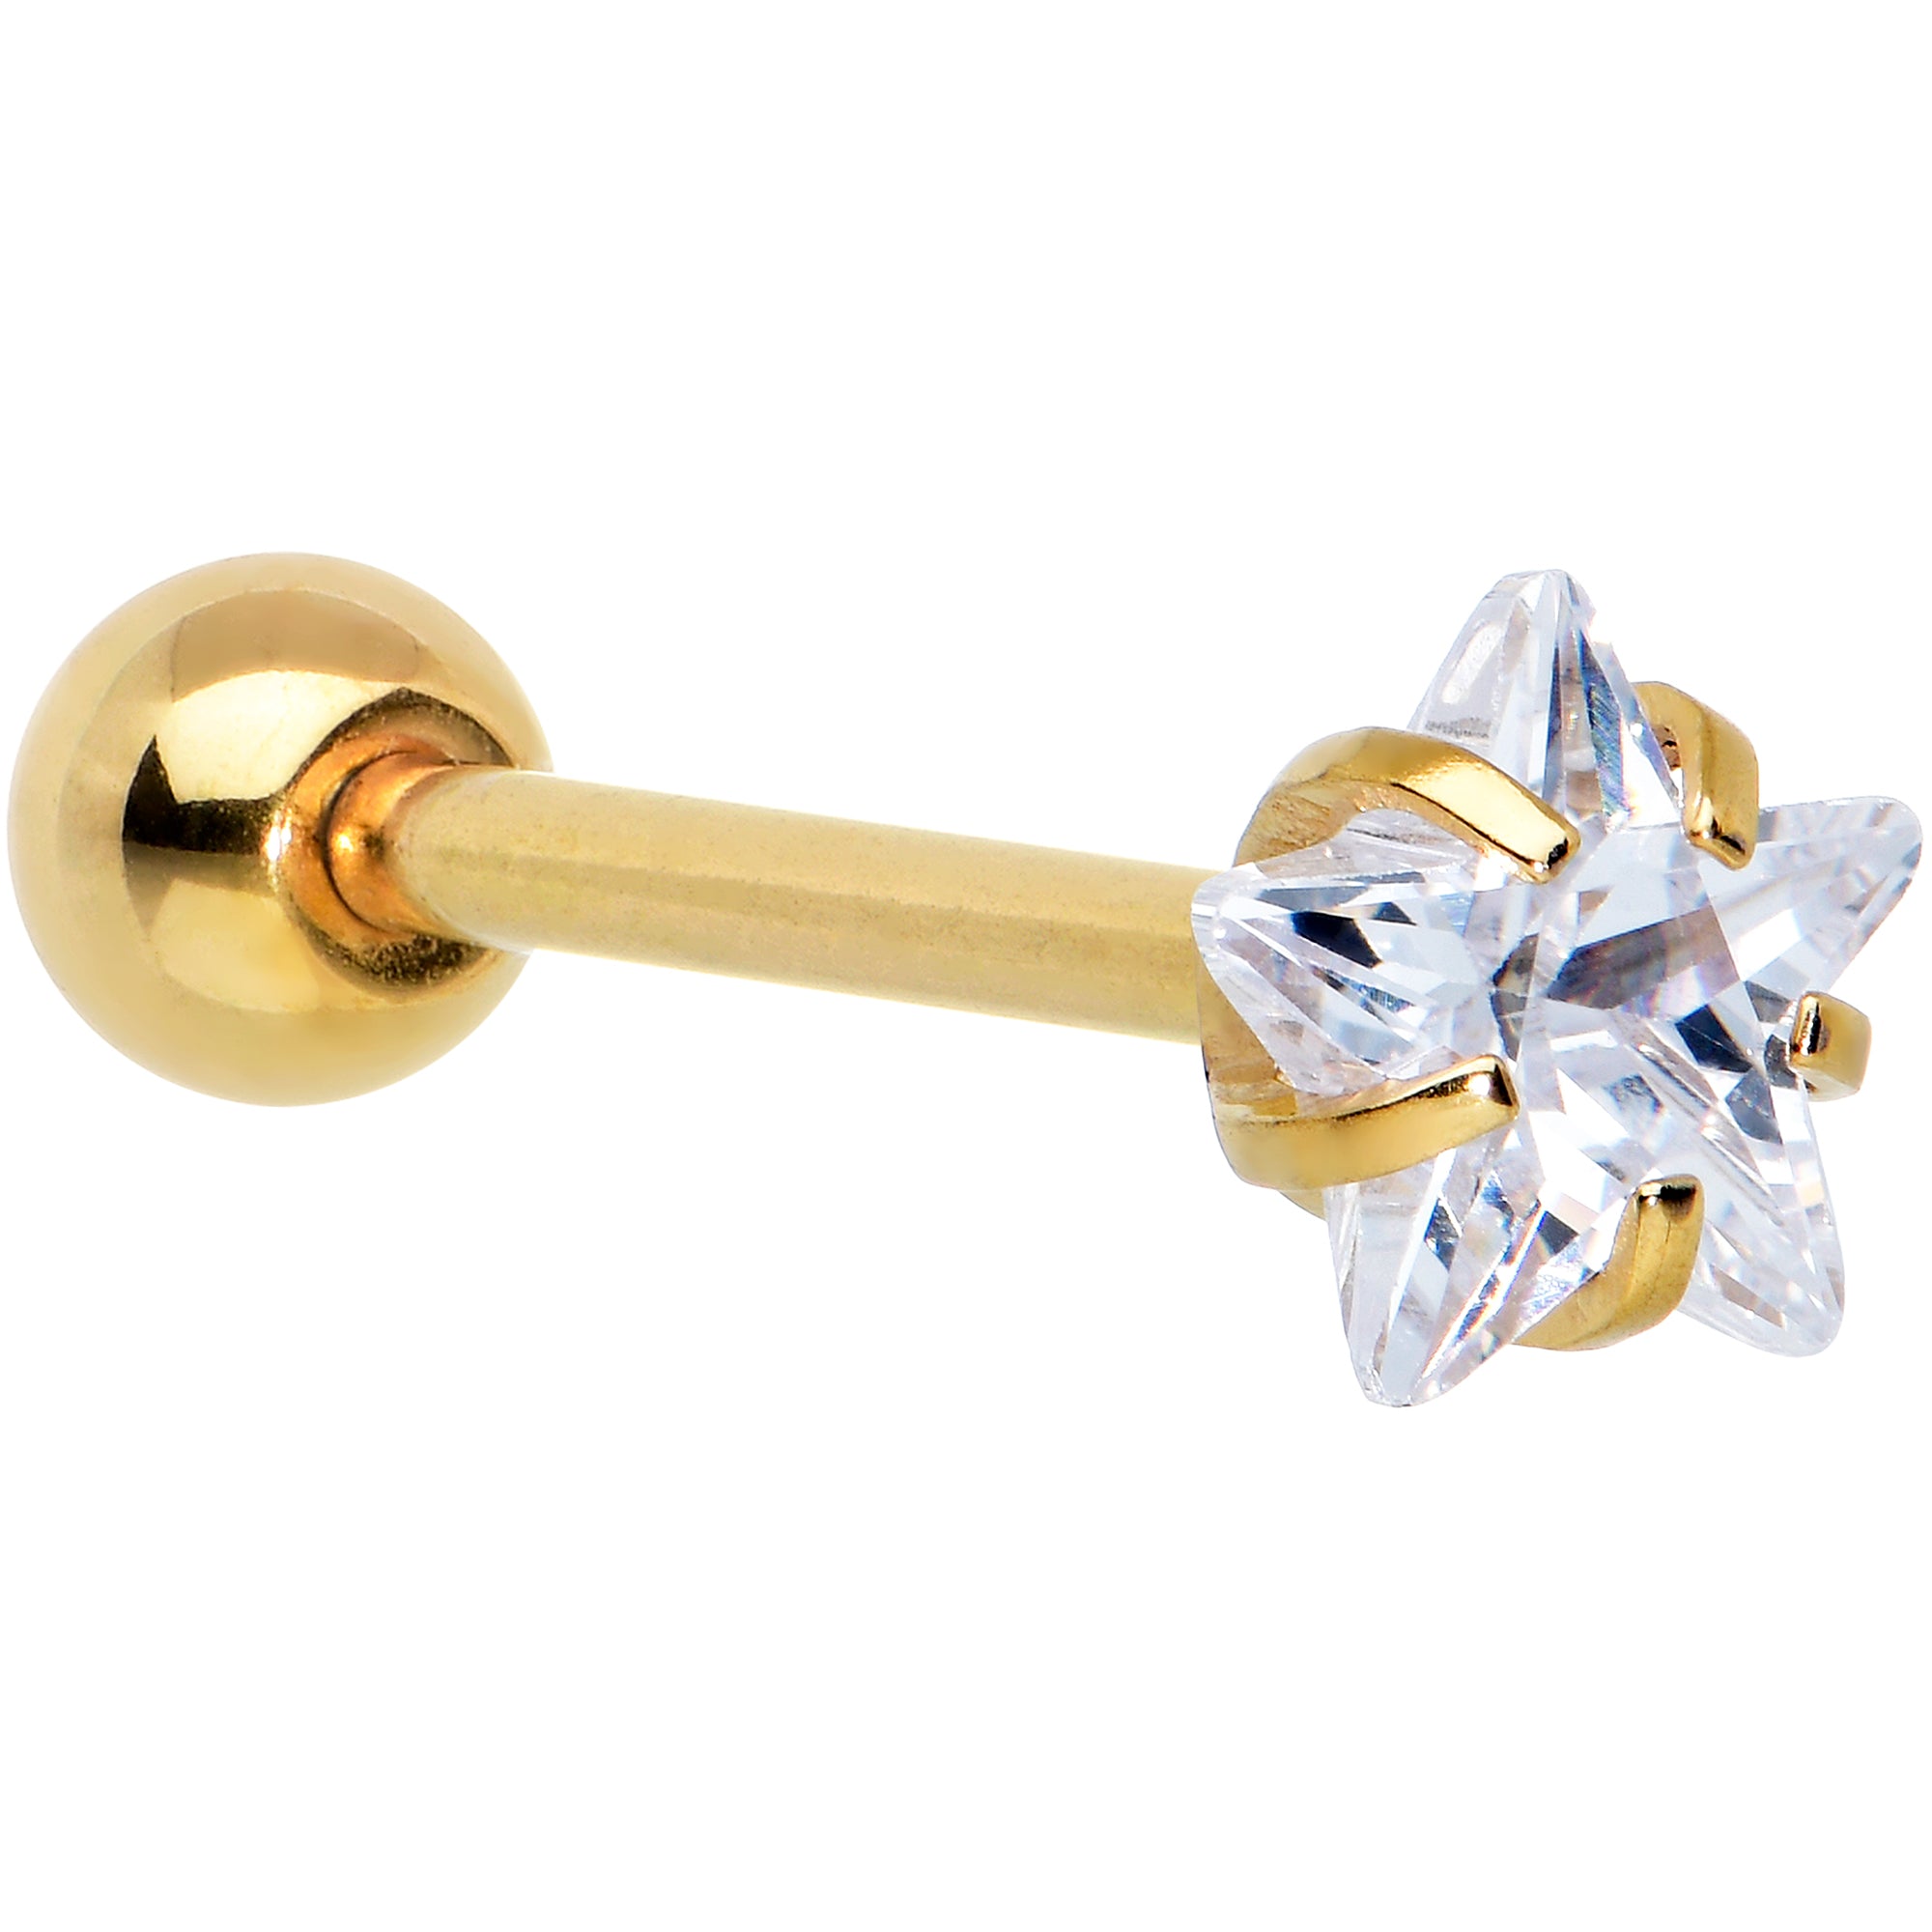 Clear CZ Gem Gold Tone Star Top Barbell Tongue Ring